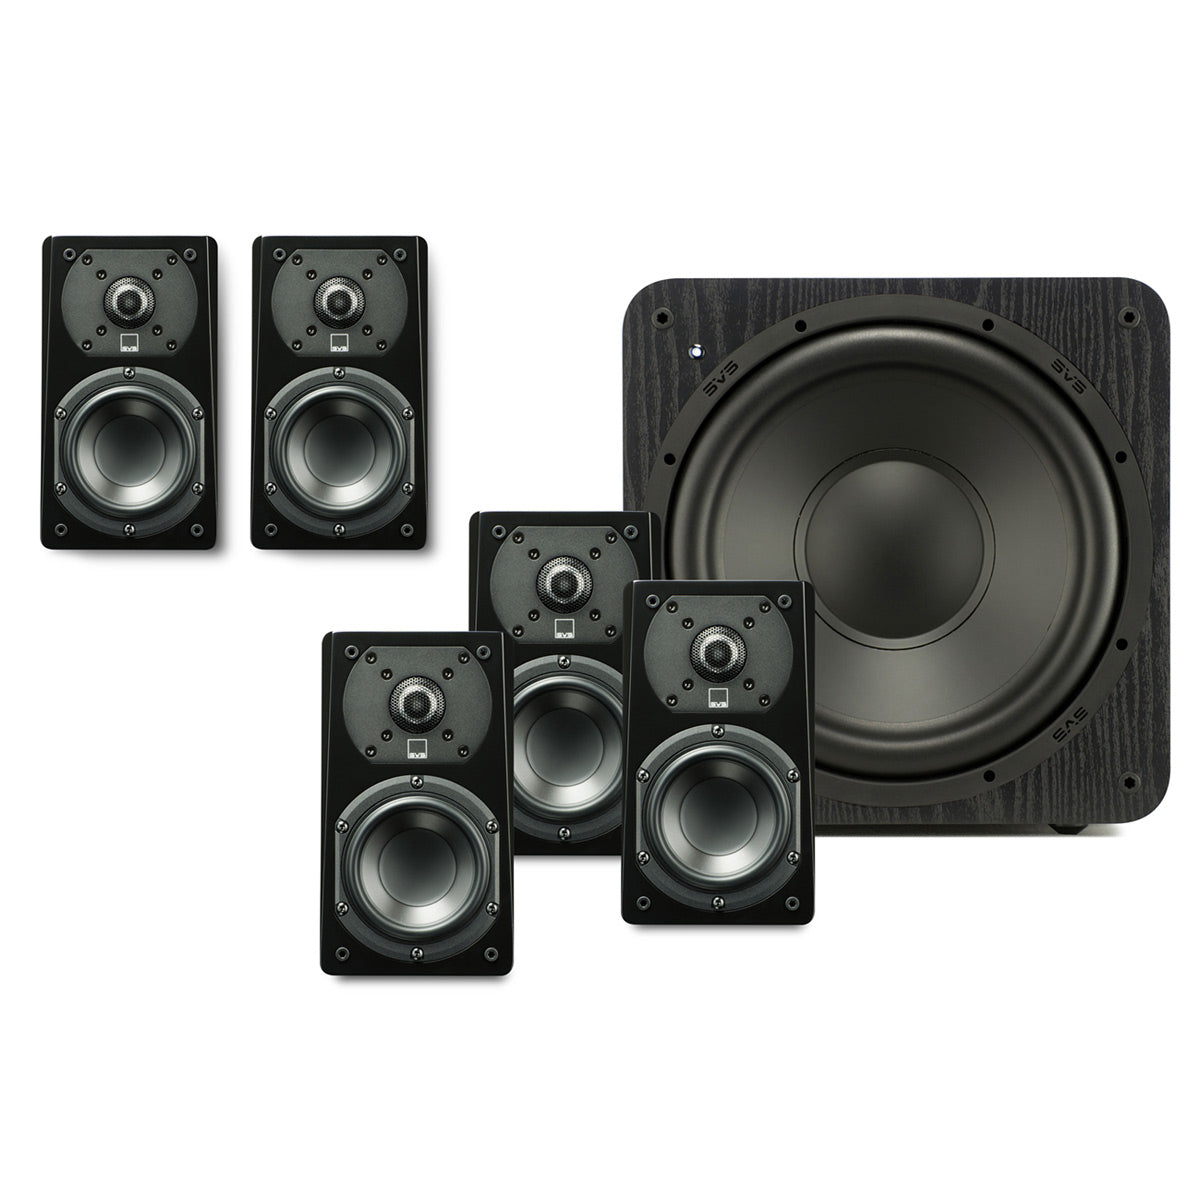 Home cinema systems: 5.1 Surround systems buy online